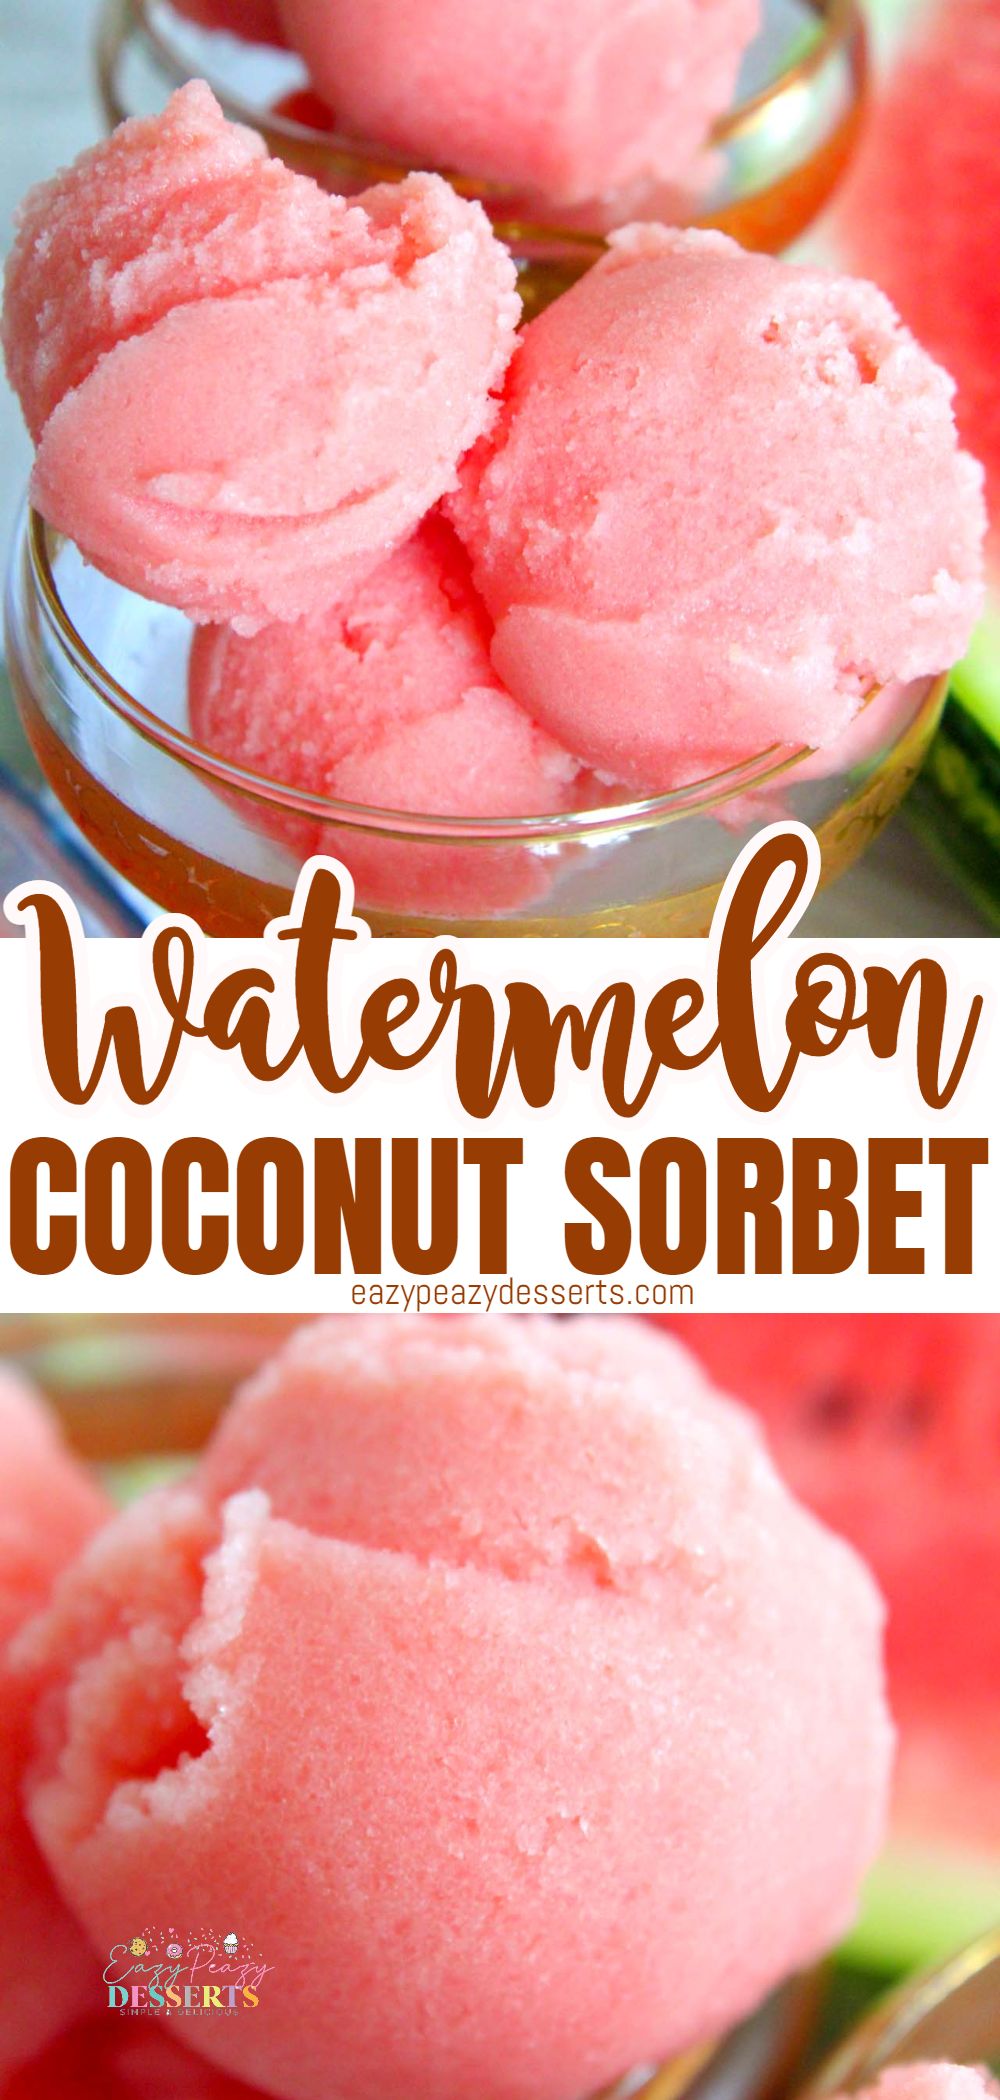 A few scoops of watermelon sorbet in ice cream cups